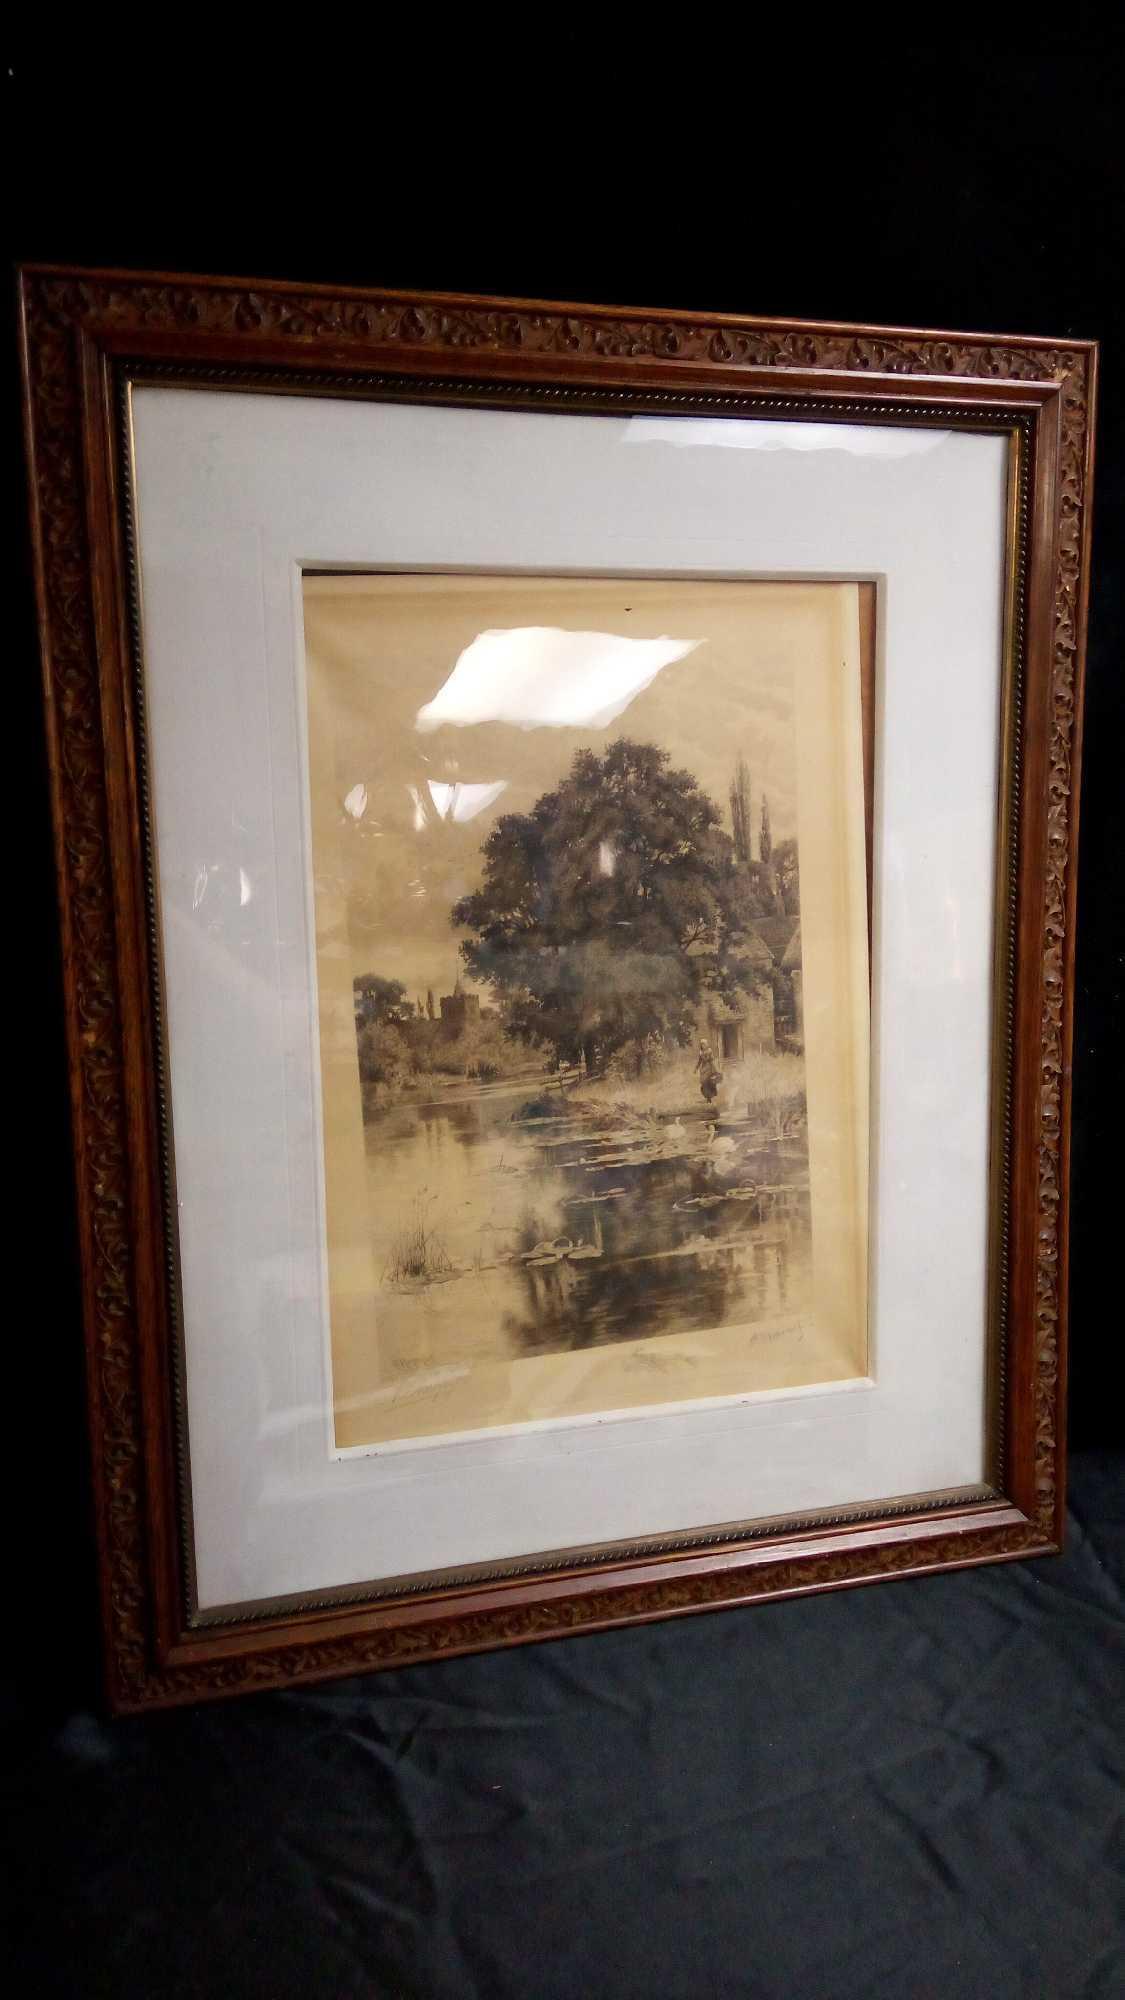 LARGE PENCIL SIGNED R. HALFNIGHT & A GRAVIER ETCHING, PUBLISHED IN LONDON 1887, FRAMED AND MATTED